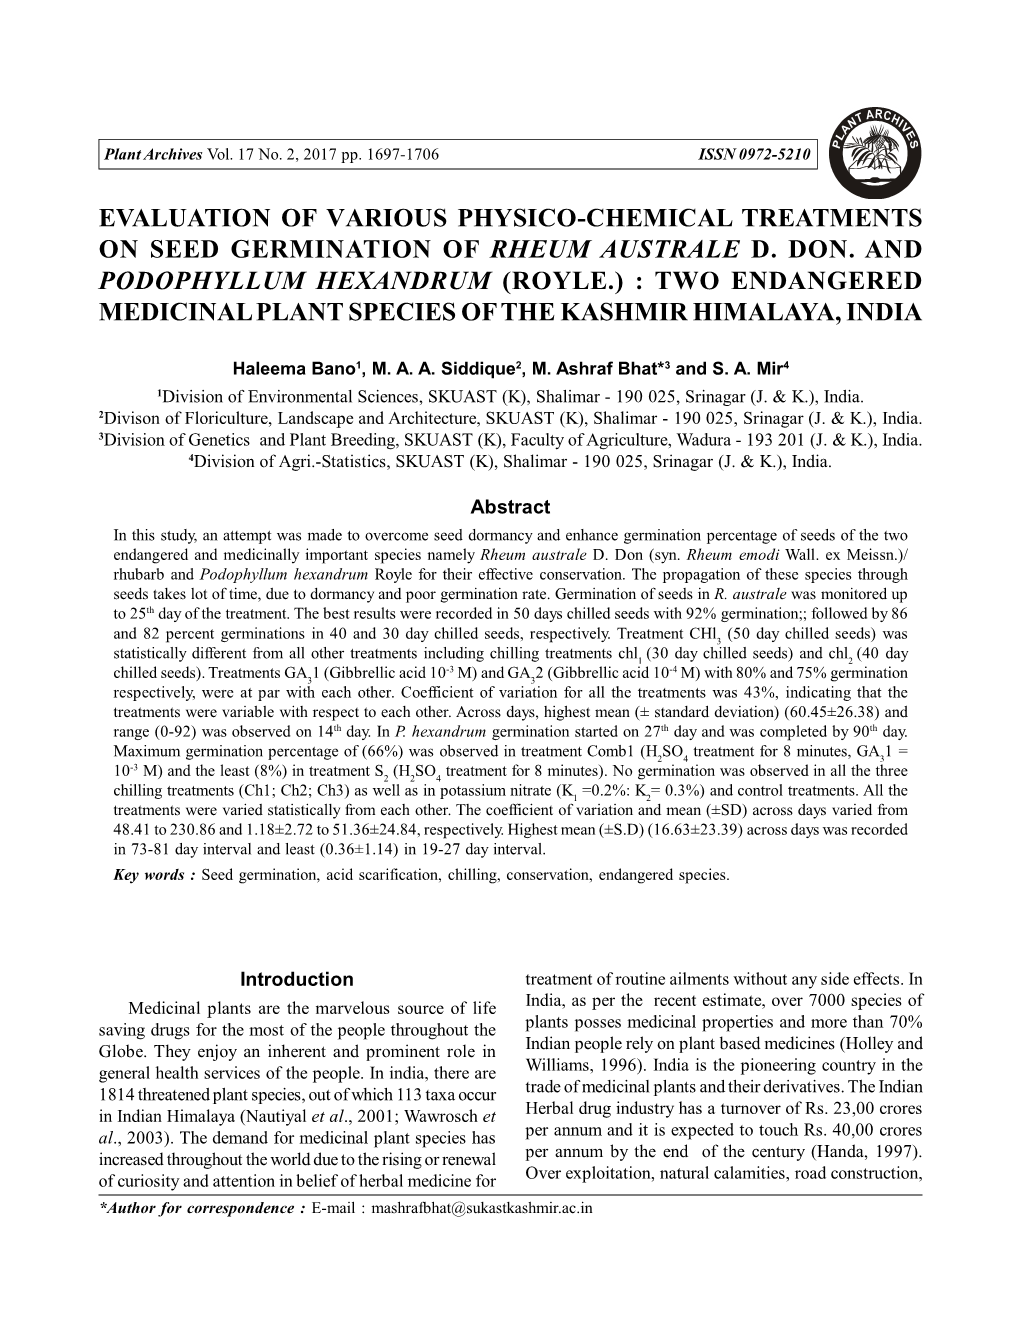 Evaluation of Various Physico-Chemical Treatments on Seed Germination of Rheum Australe D